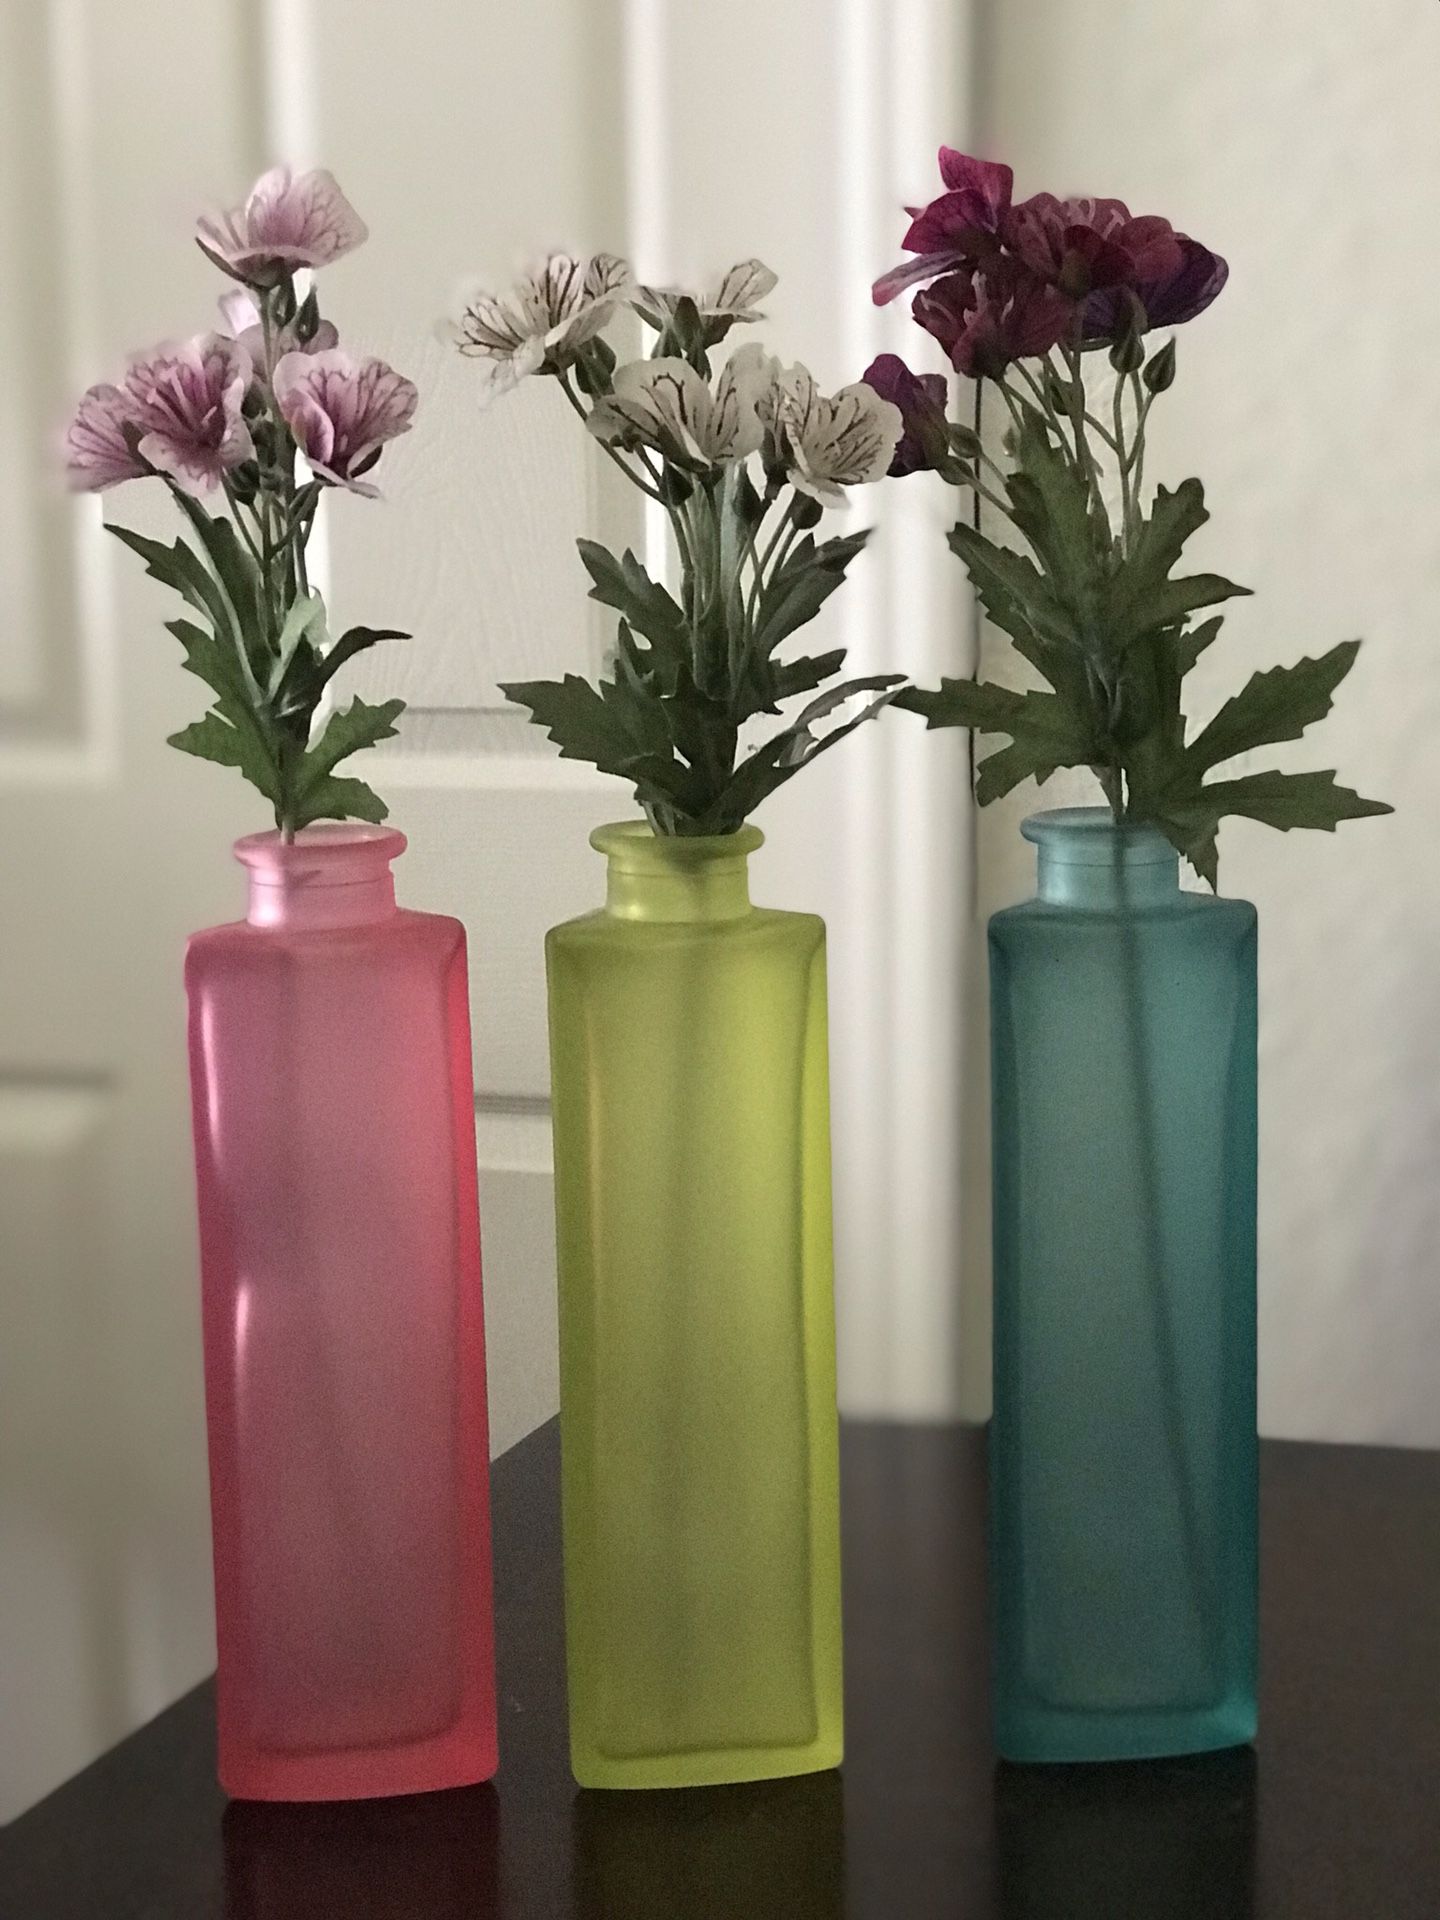 Glass Vase with flowers